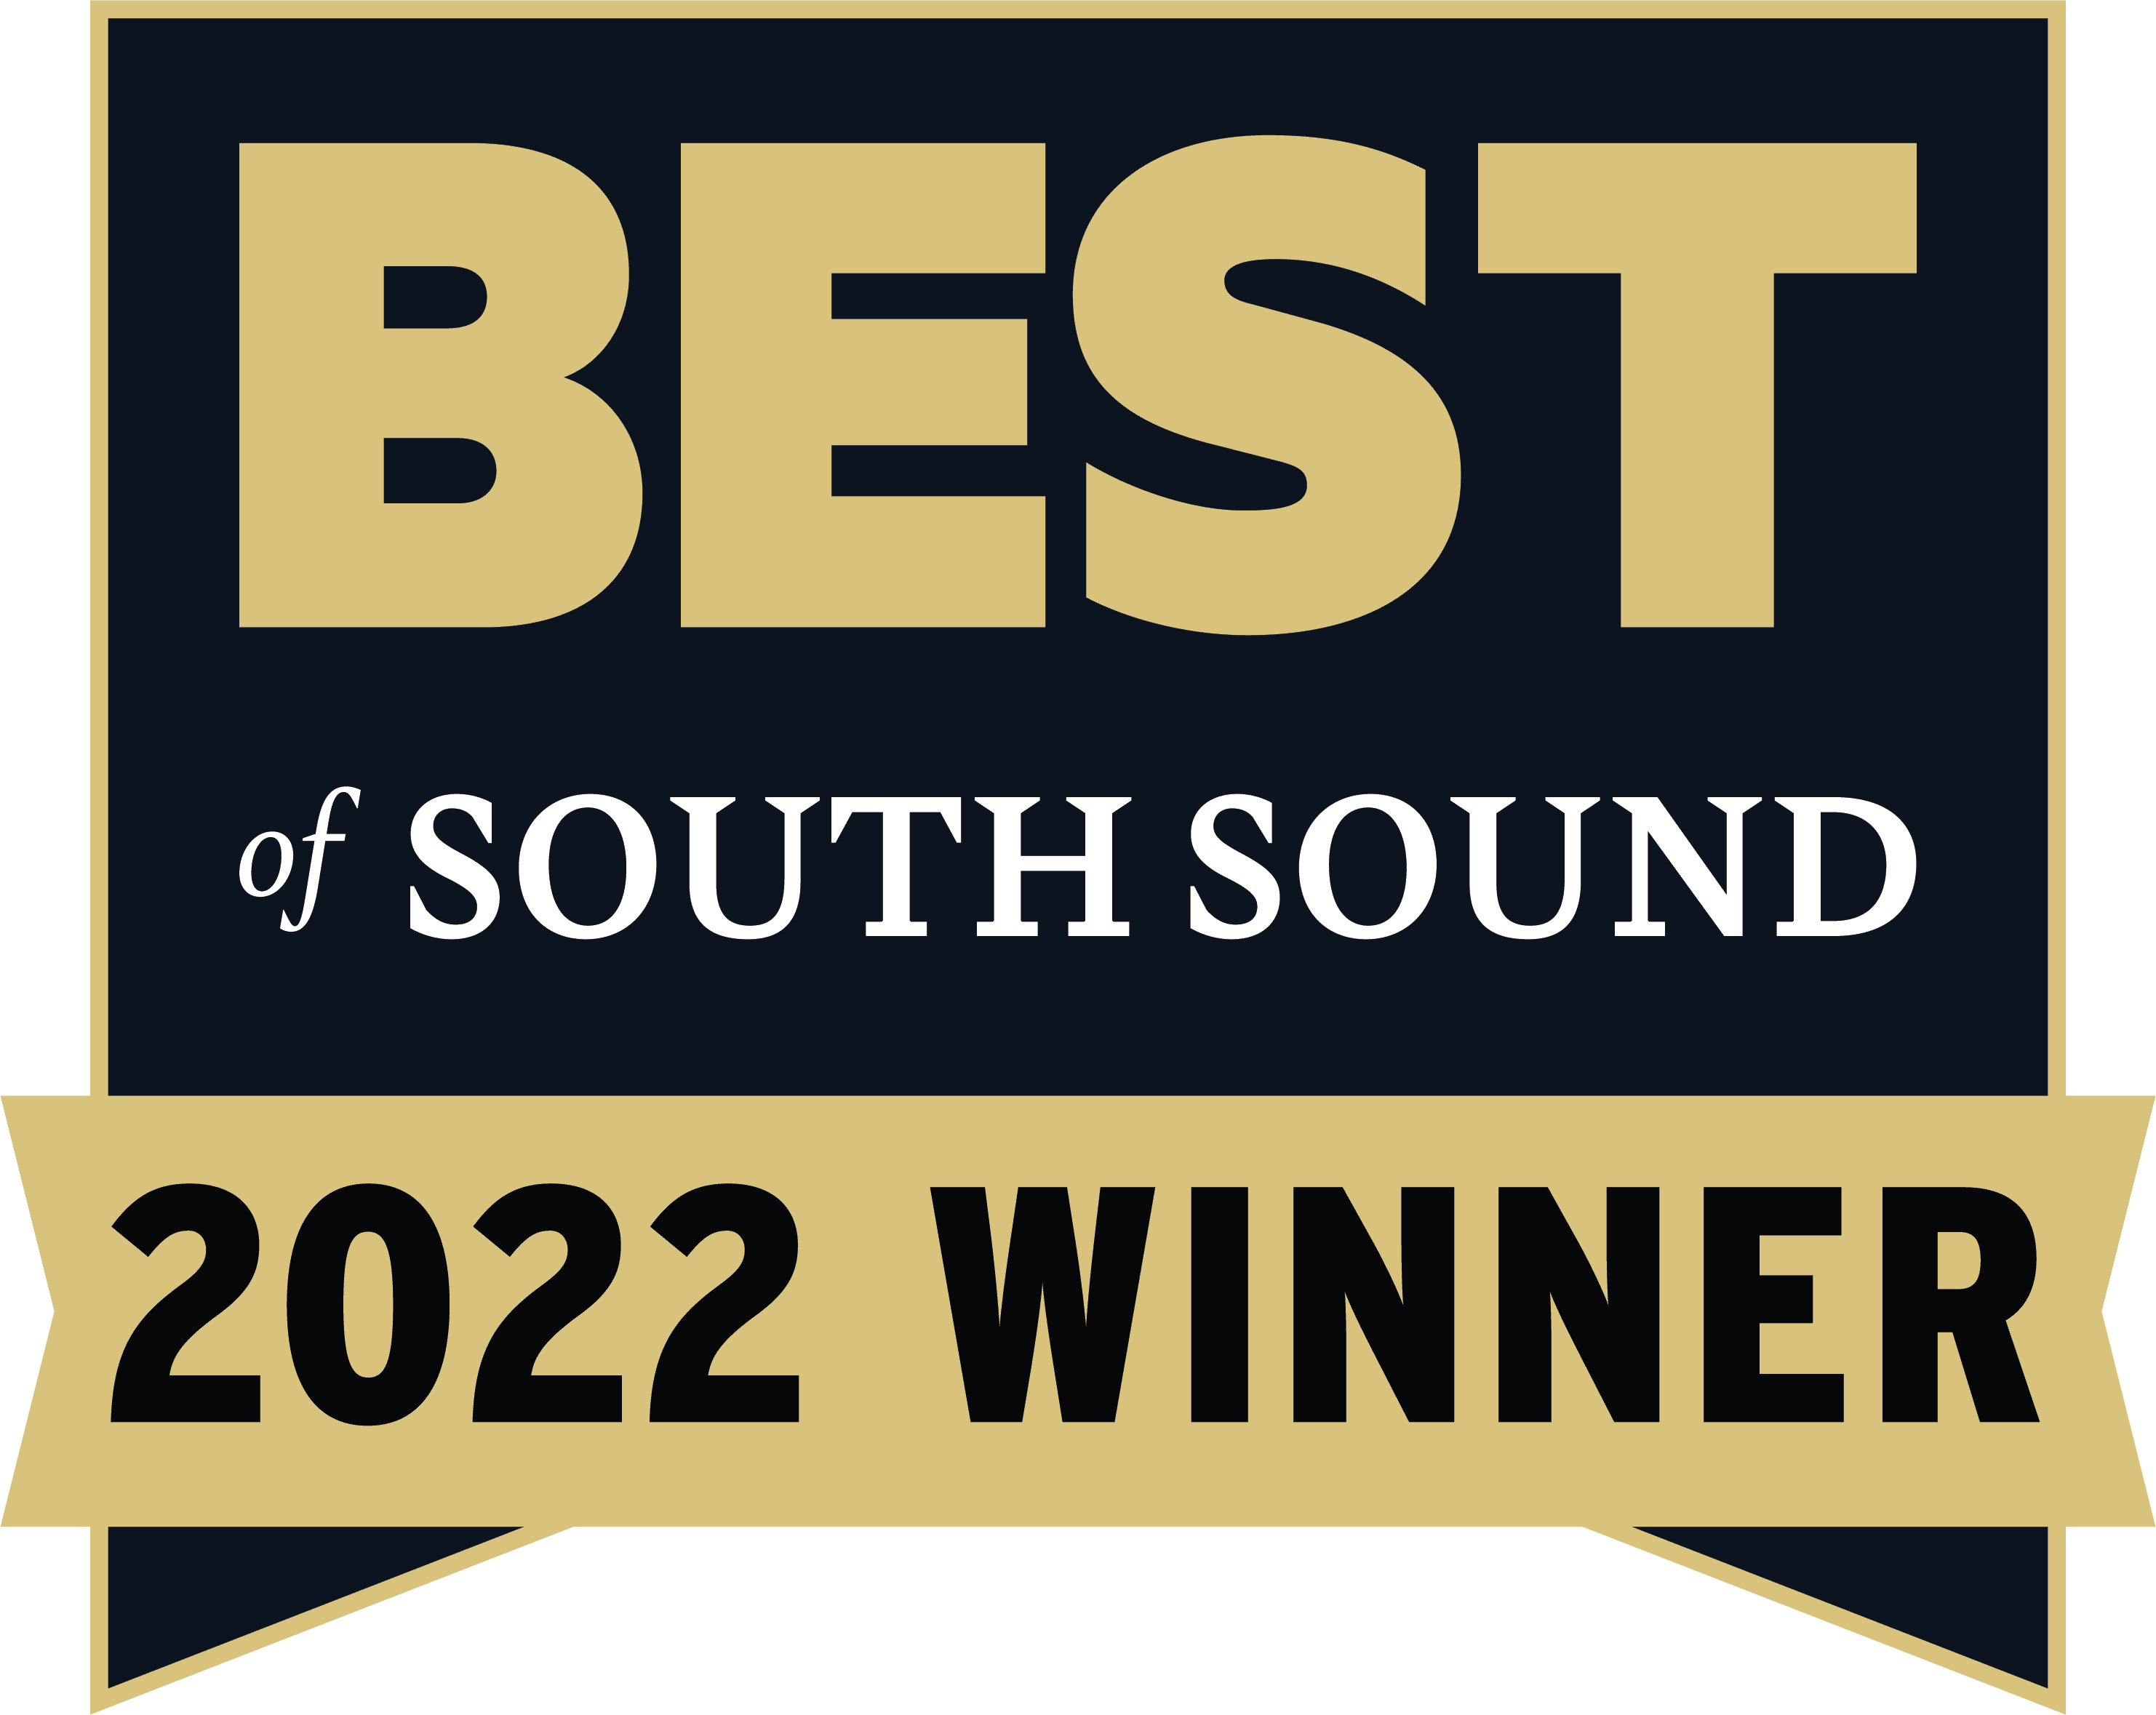 The Sequoia Assisted Living Community is a Best of South Sound winner